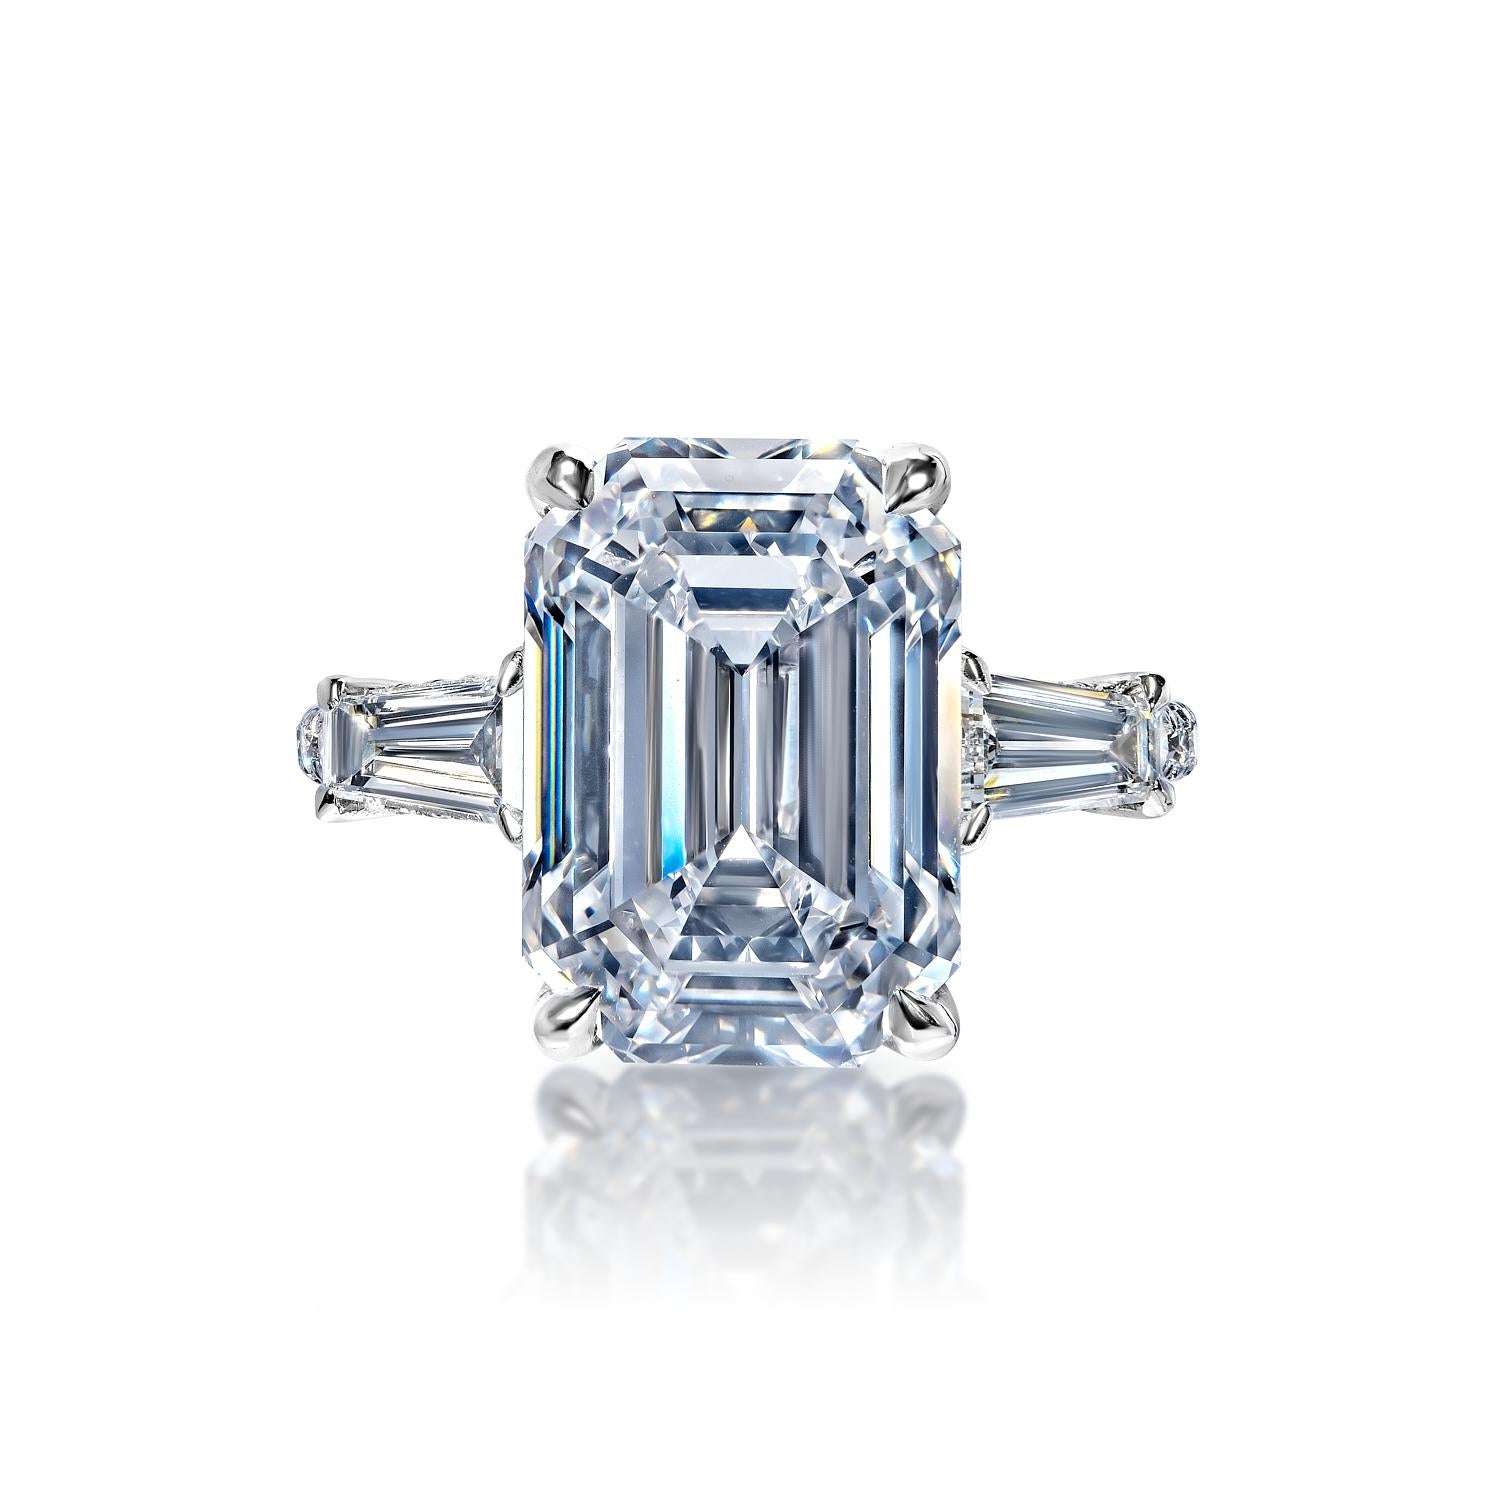 Mara 9 Carats D VVS2 Emerald Cut Diamond Engagement Ring in Platinum by Mike Nekta

GIA CERTIFIED
Center Diamond:

Carat Weight: 7.62 Carats
Color : D*
Clarity: VVS2
Style: Emerald Cut

*This Diamond has been treated by one or more processes to